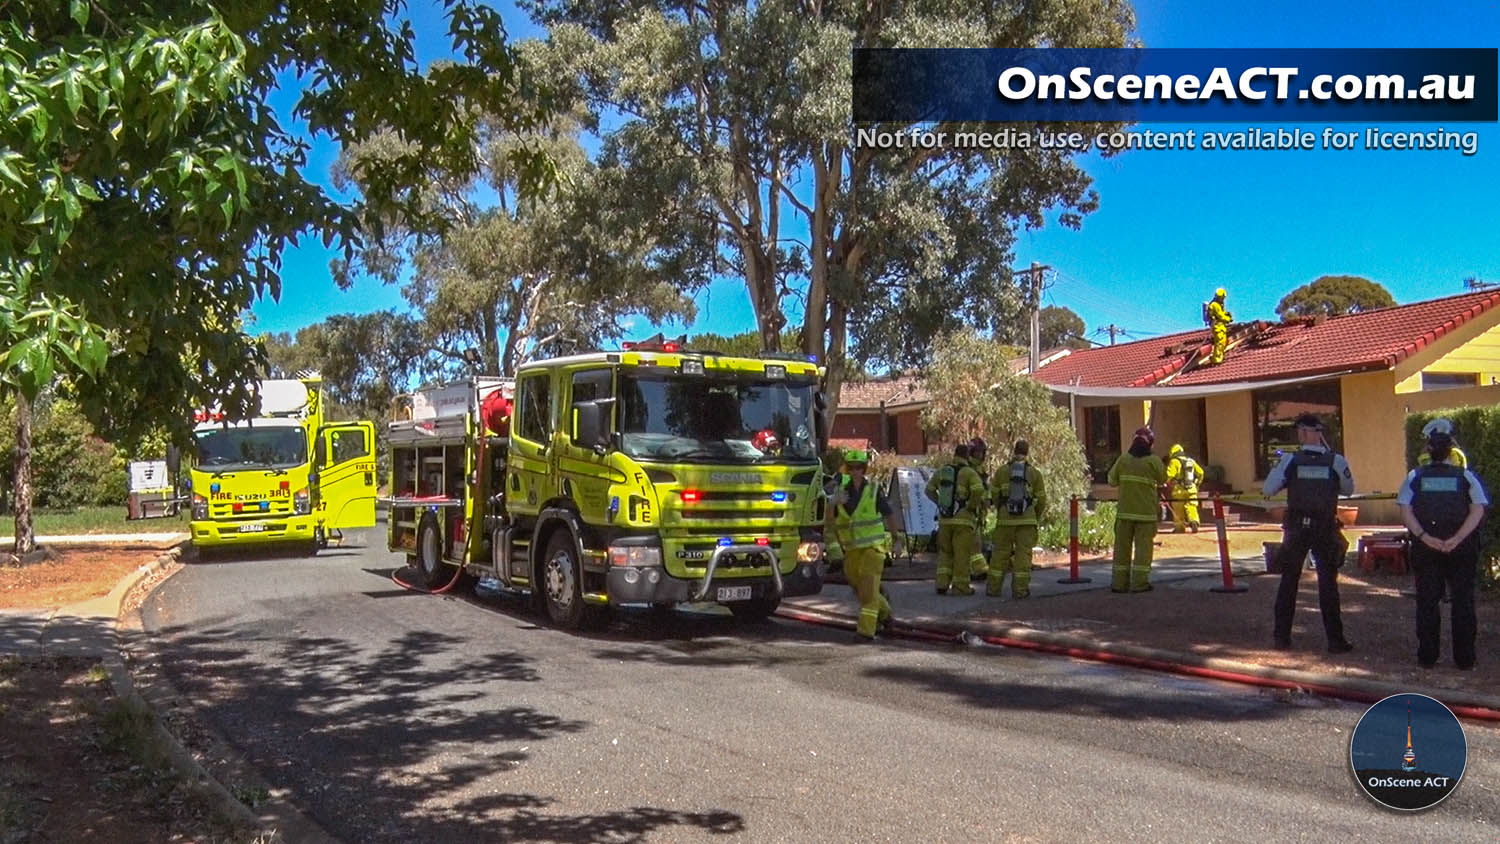 20210305 1200 scullin house fire image 11